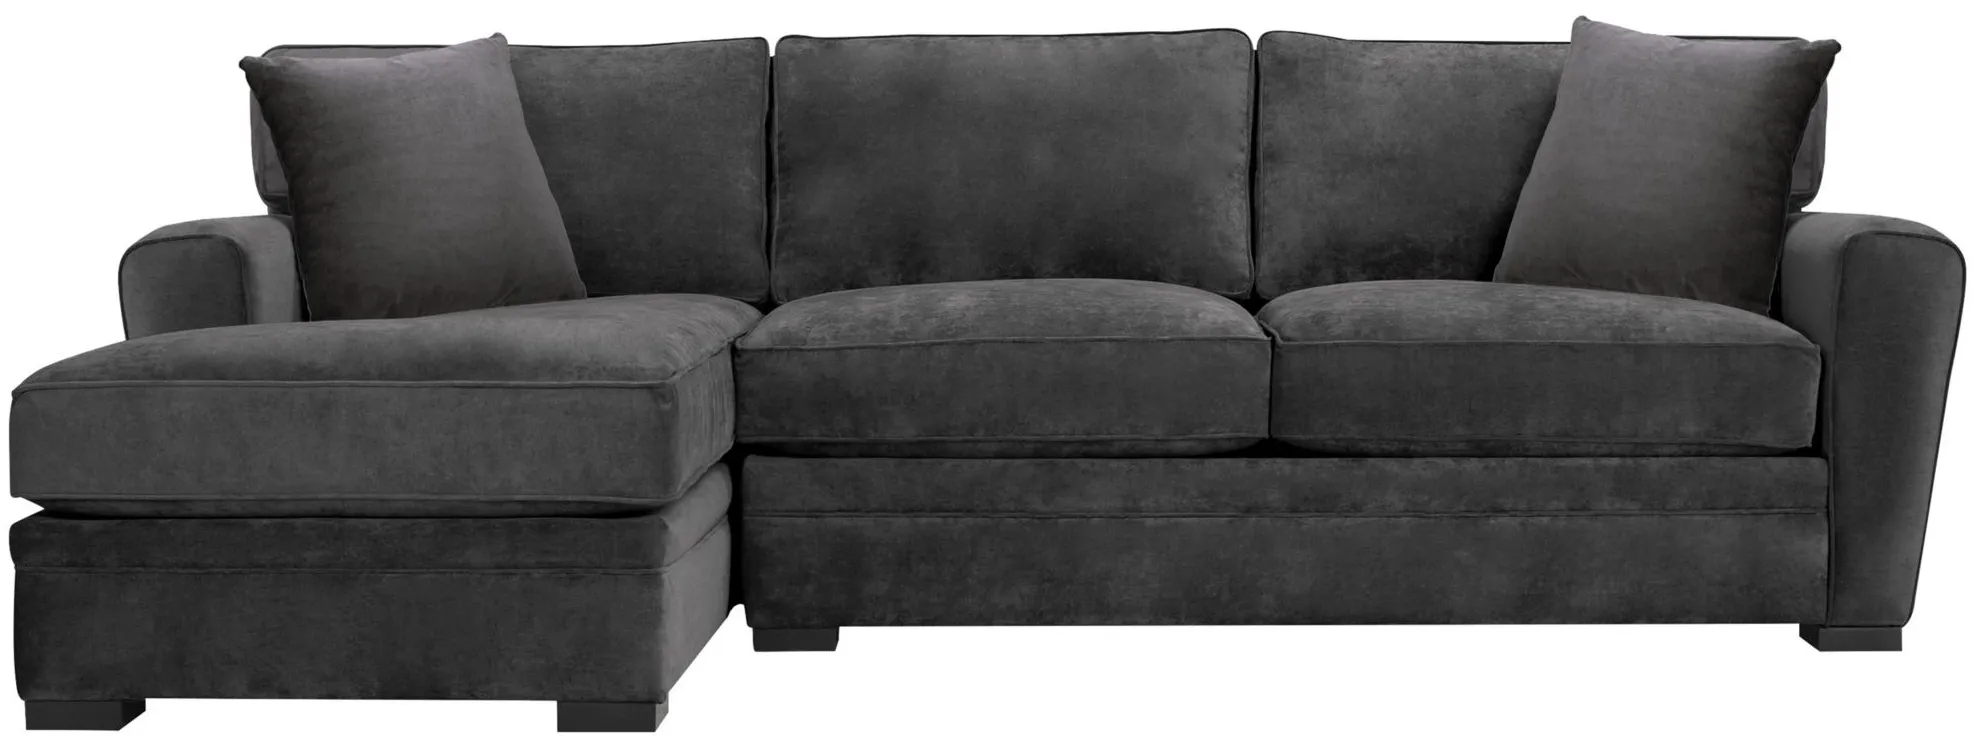 Artemis II 2-pc. Left Hand Facing Sectional Sofa in Gypsy Graphite by Jonathan Louis